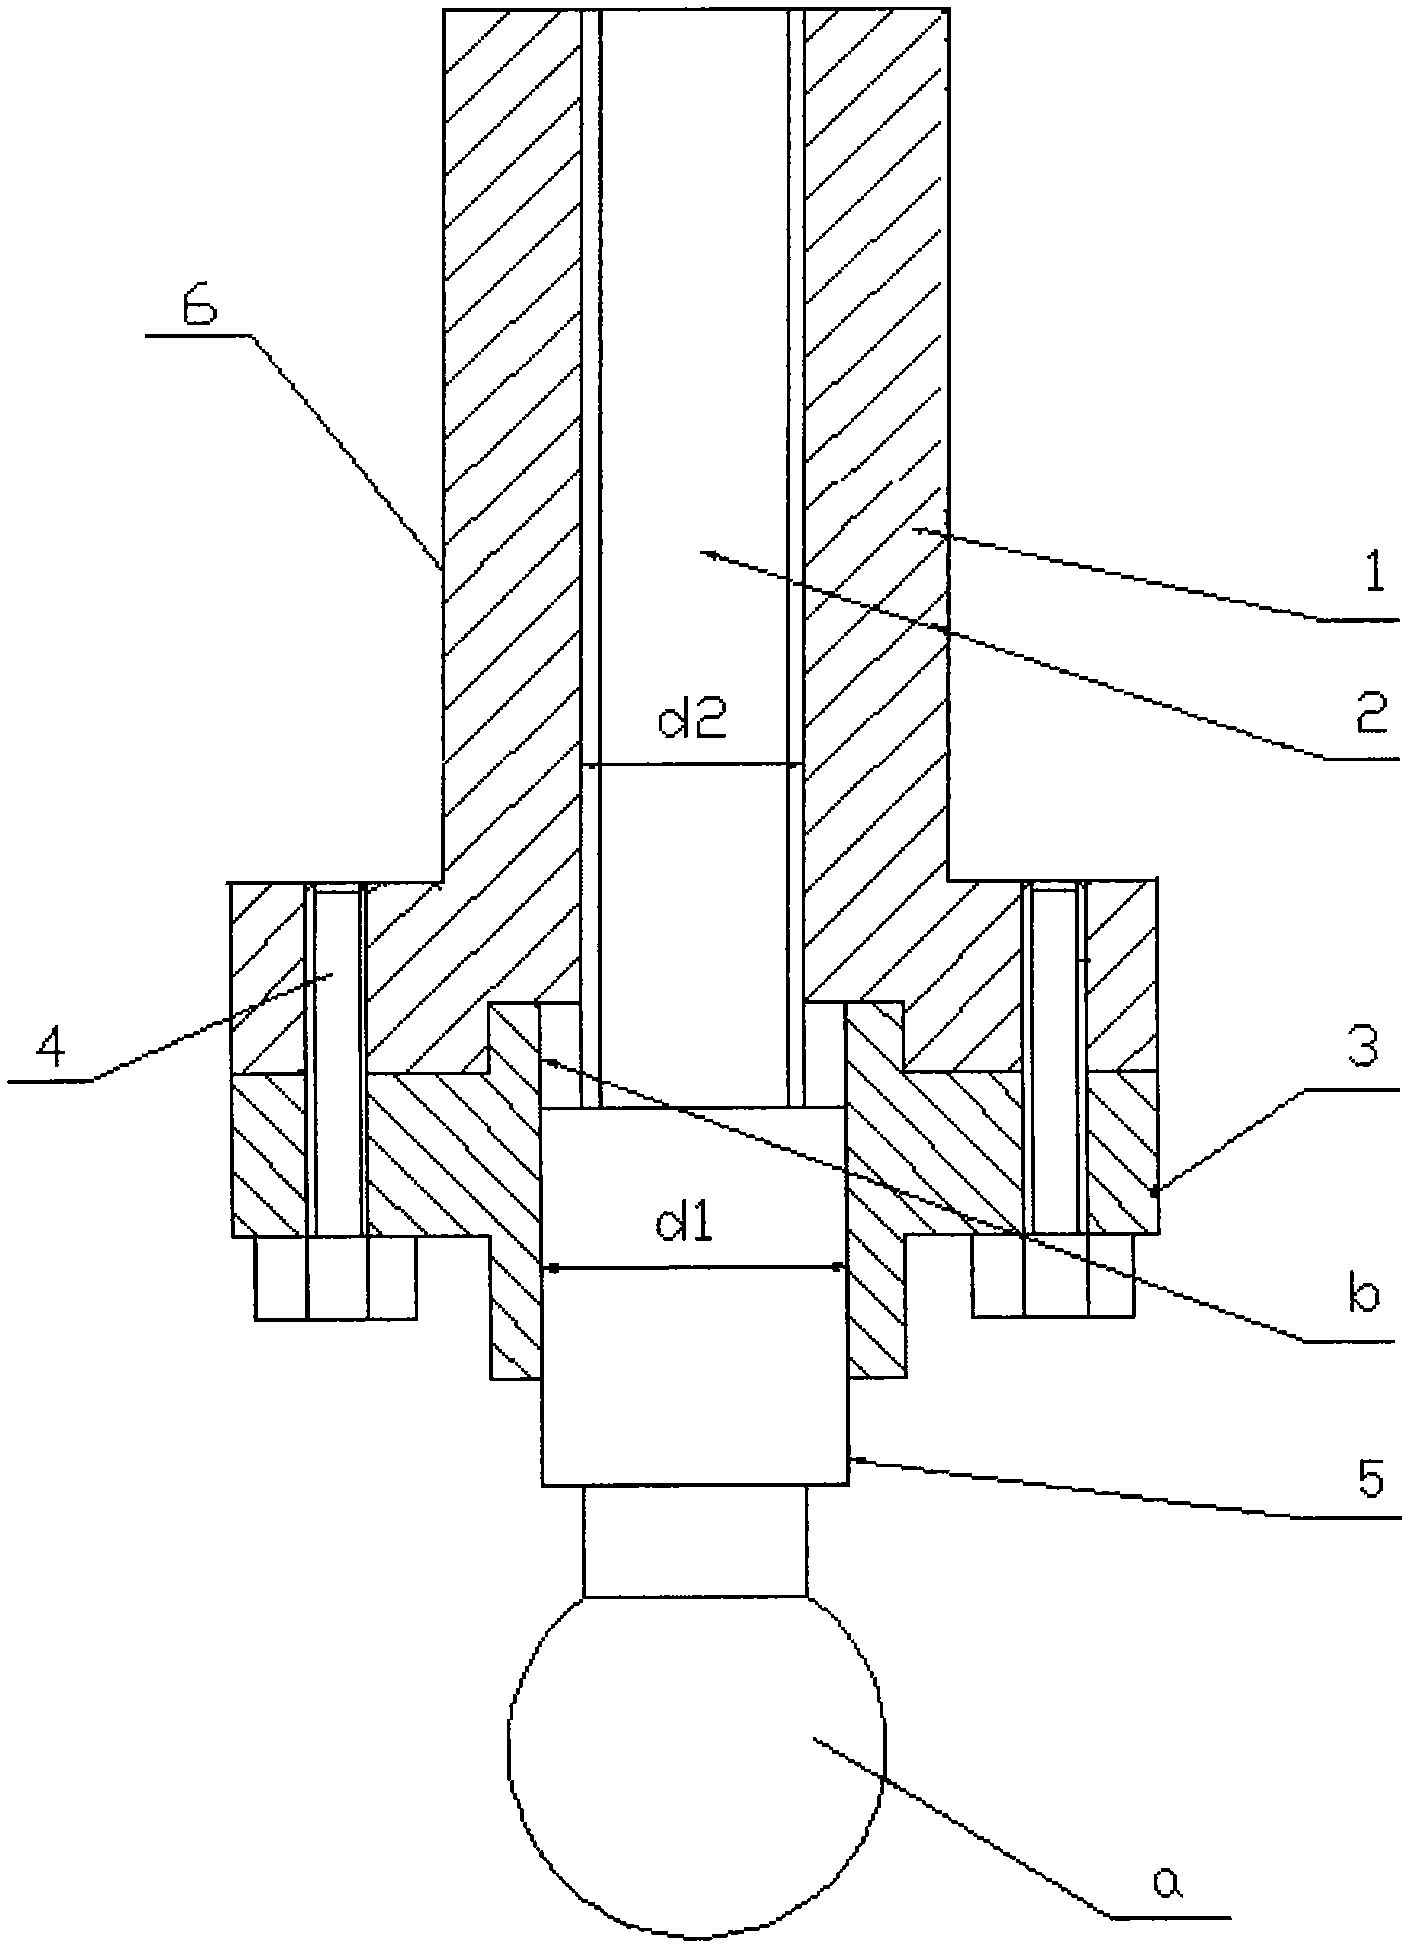 Novel connecting device for connecting rod and ball screw rod